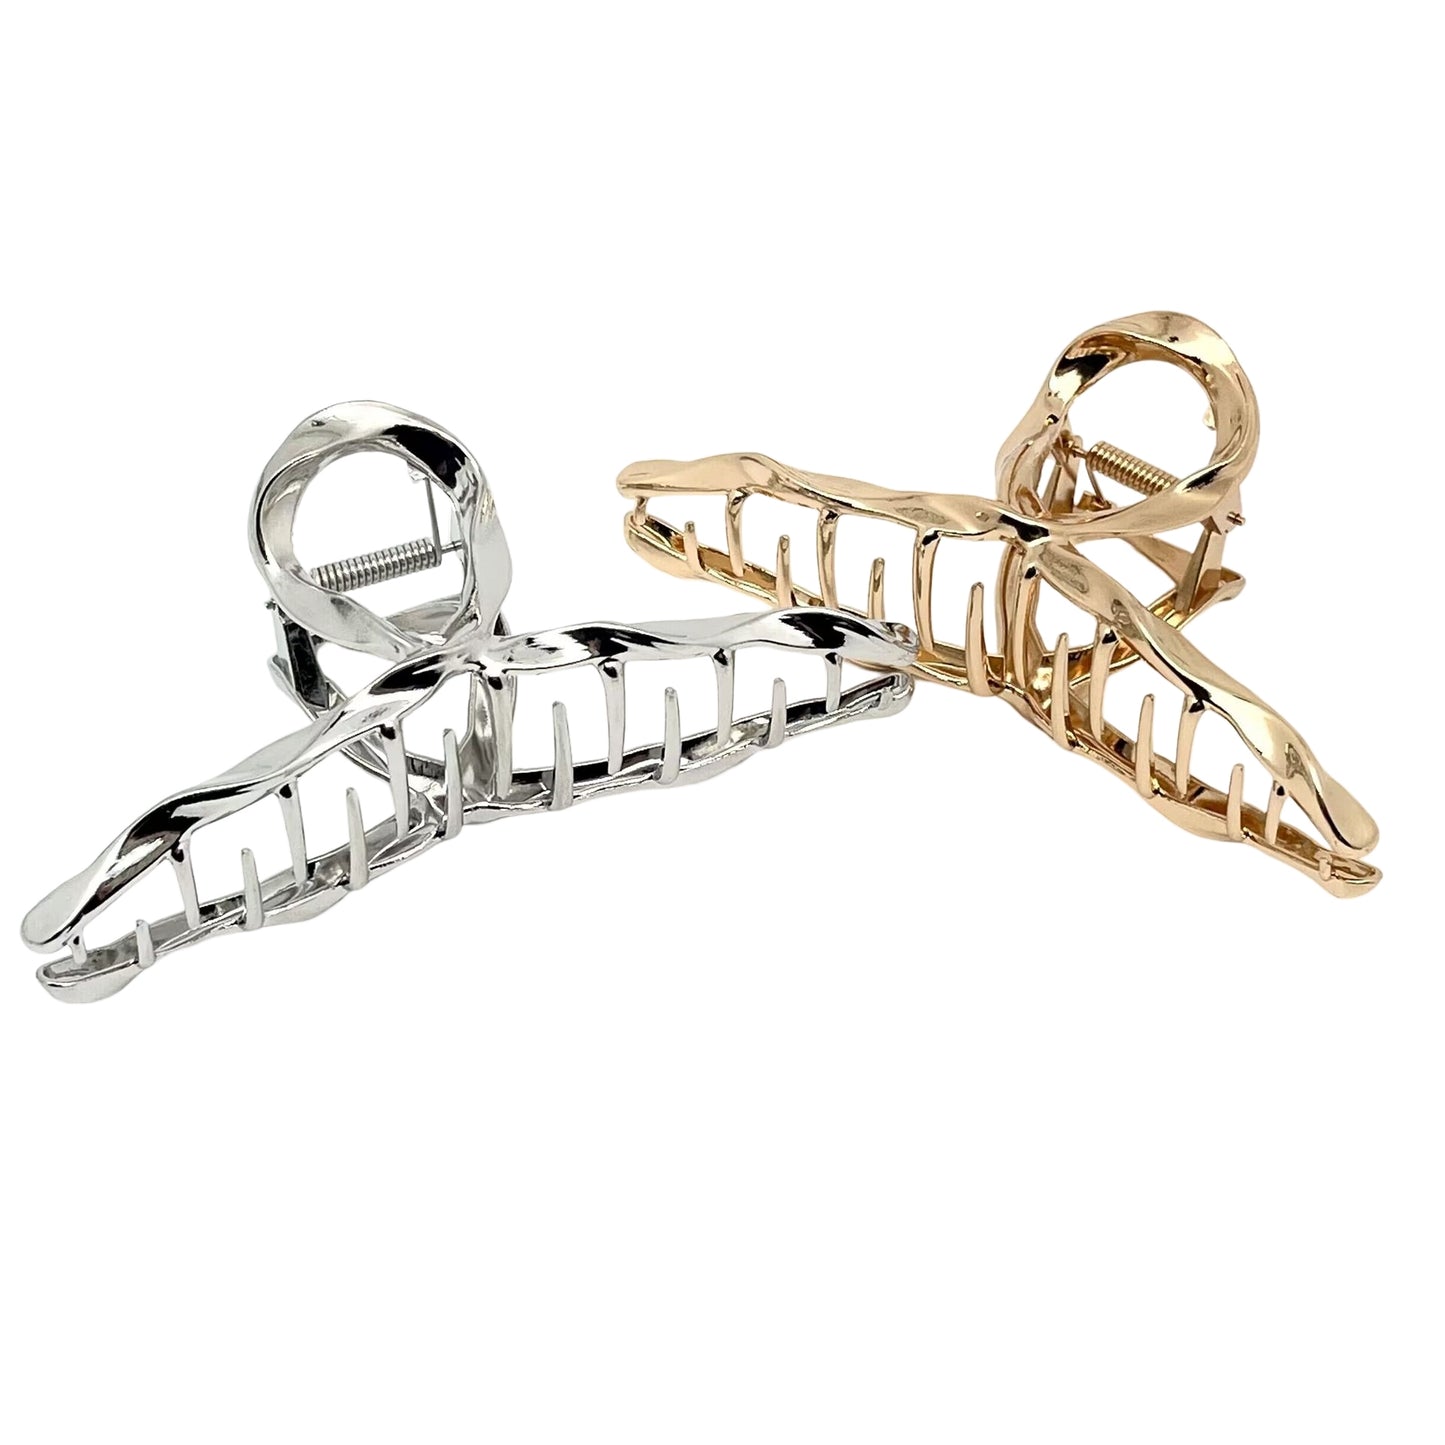 BSCI Audited Factory Large Metal Hair Claw Clips -13.5*6CM, Perfect Big gold Jaw hair clamps for Women and Thinner, Thick hair styling,Strong Hold, Fashion Hair Accessories